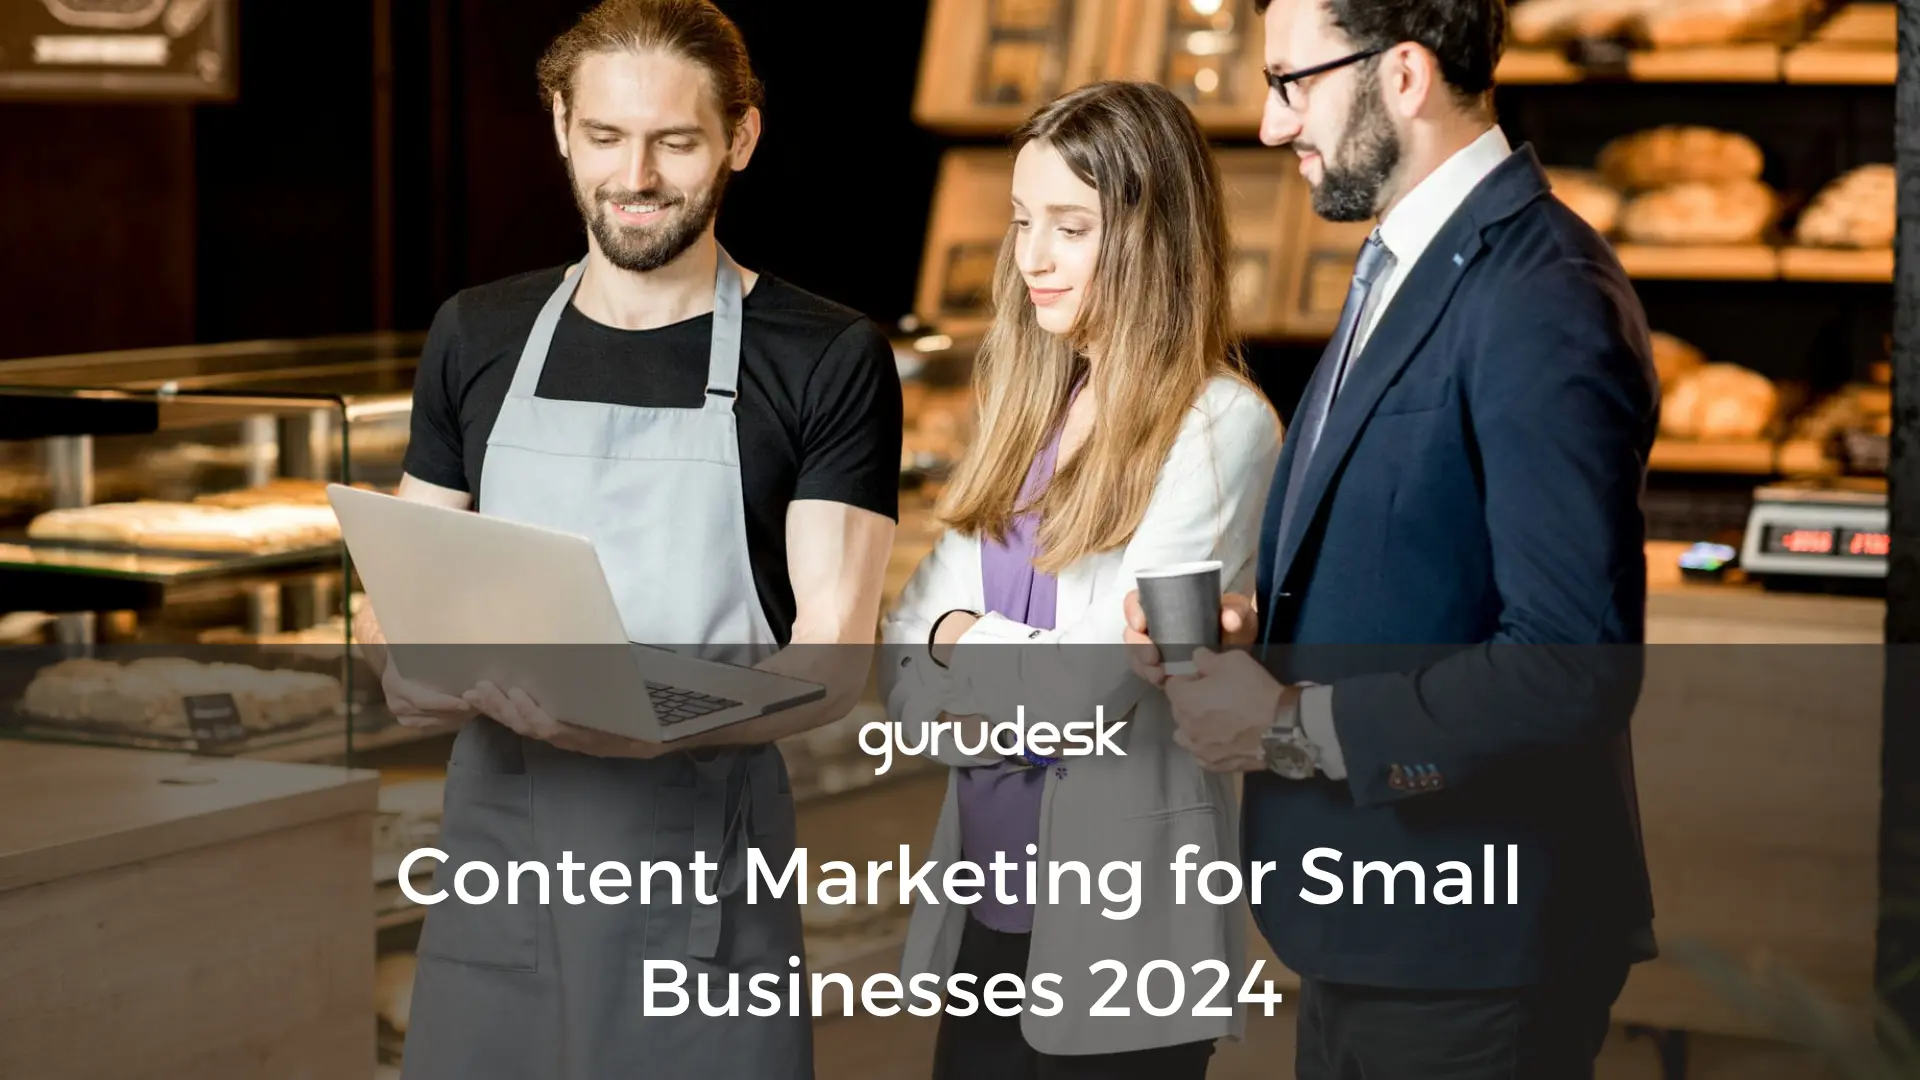 Content Marketing for Small Businesses 2024 